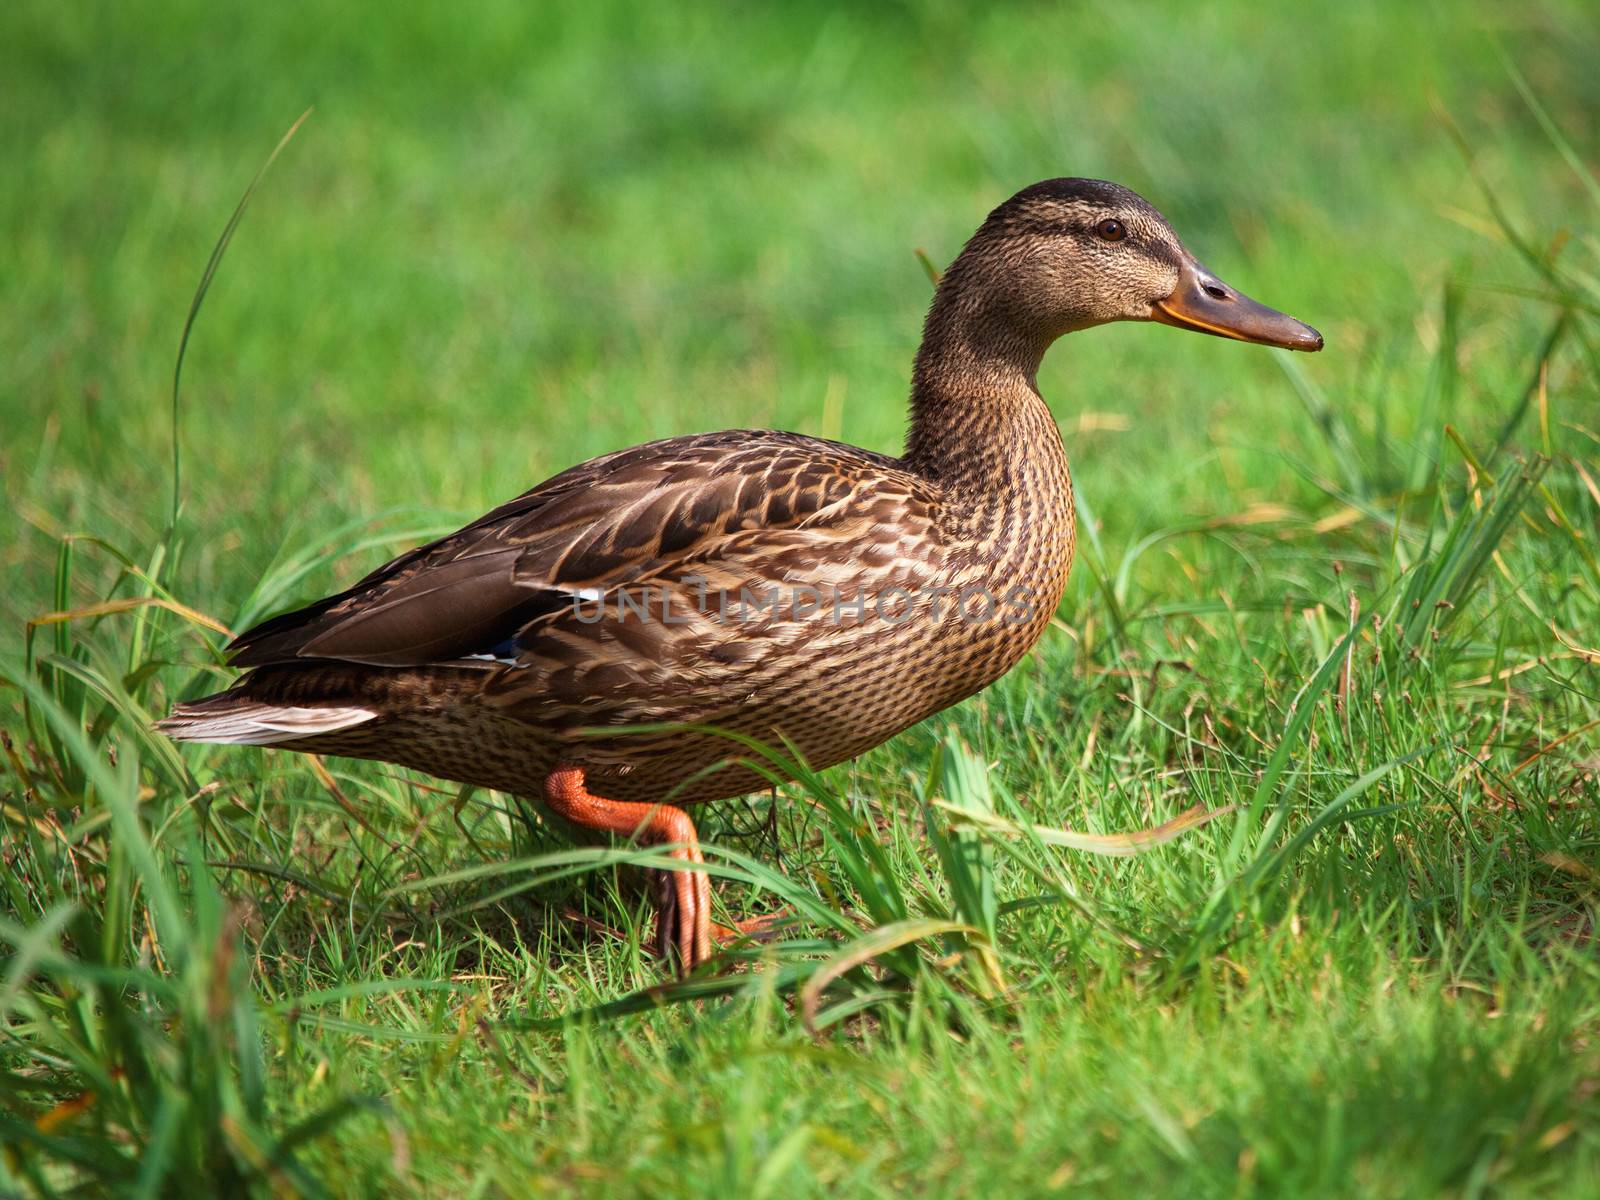 Duck on the river bank in summer day